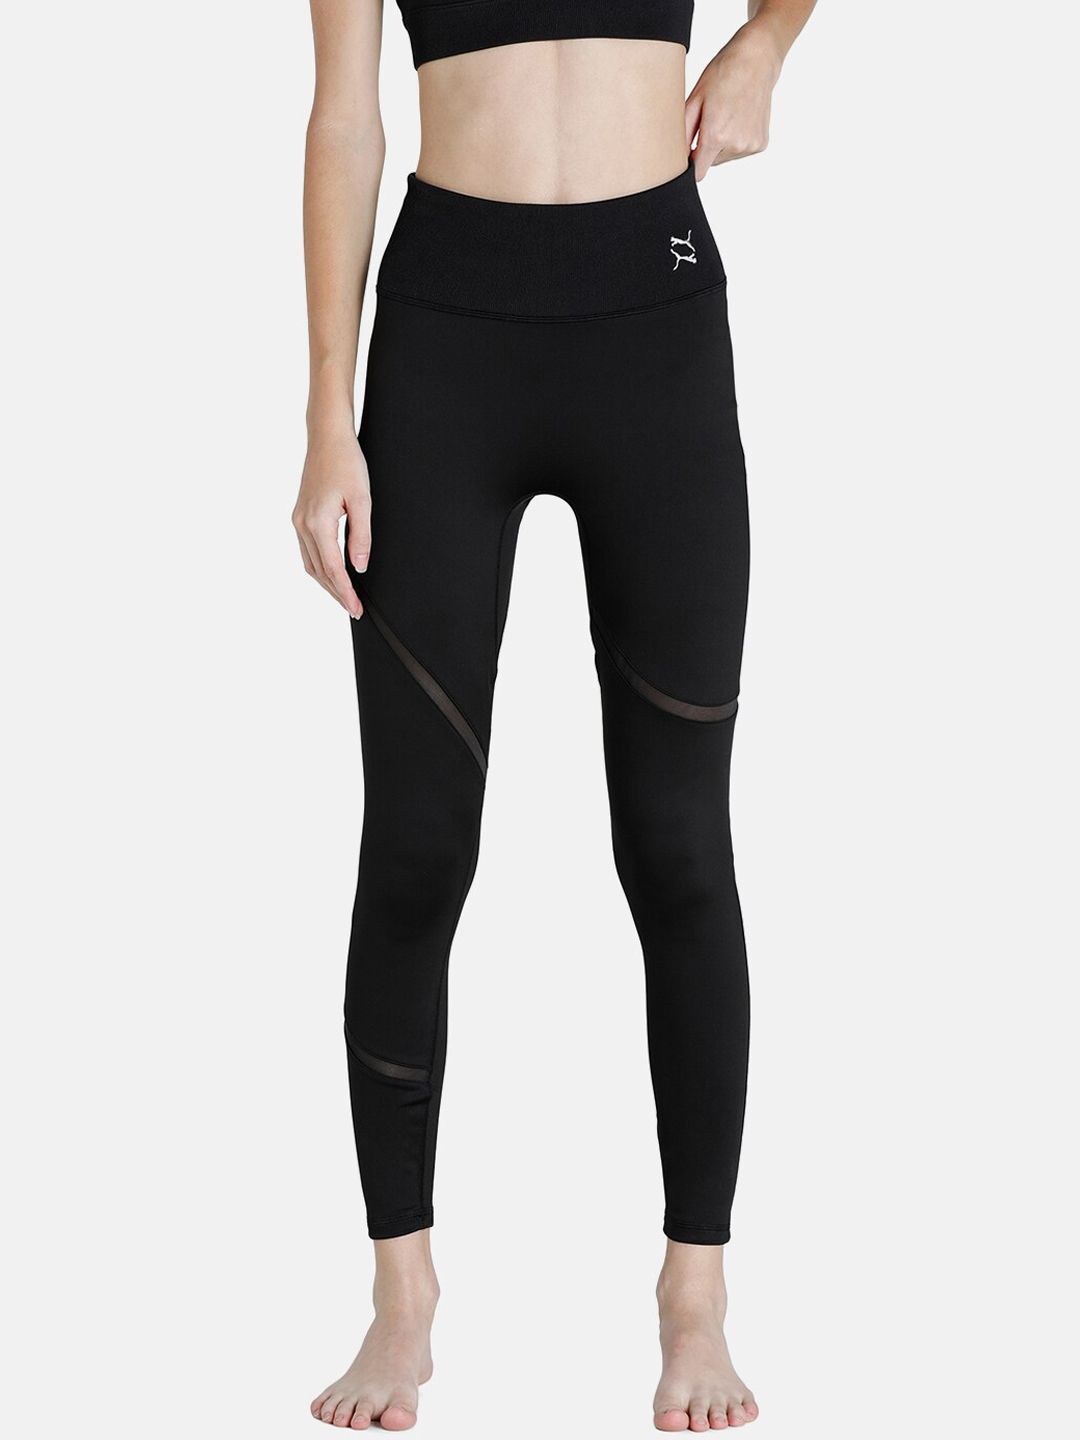 Puma Women Black Solid EXHALE Mesh Curve Yoga Tights Price in India